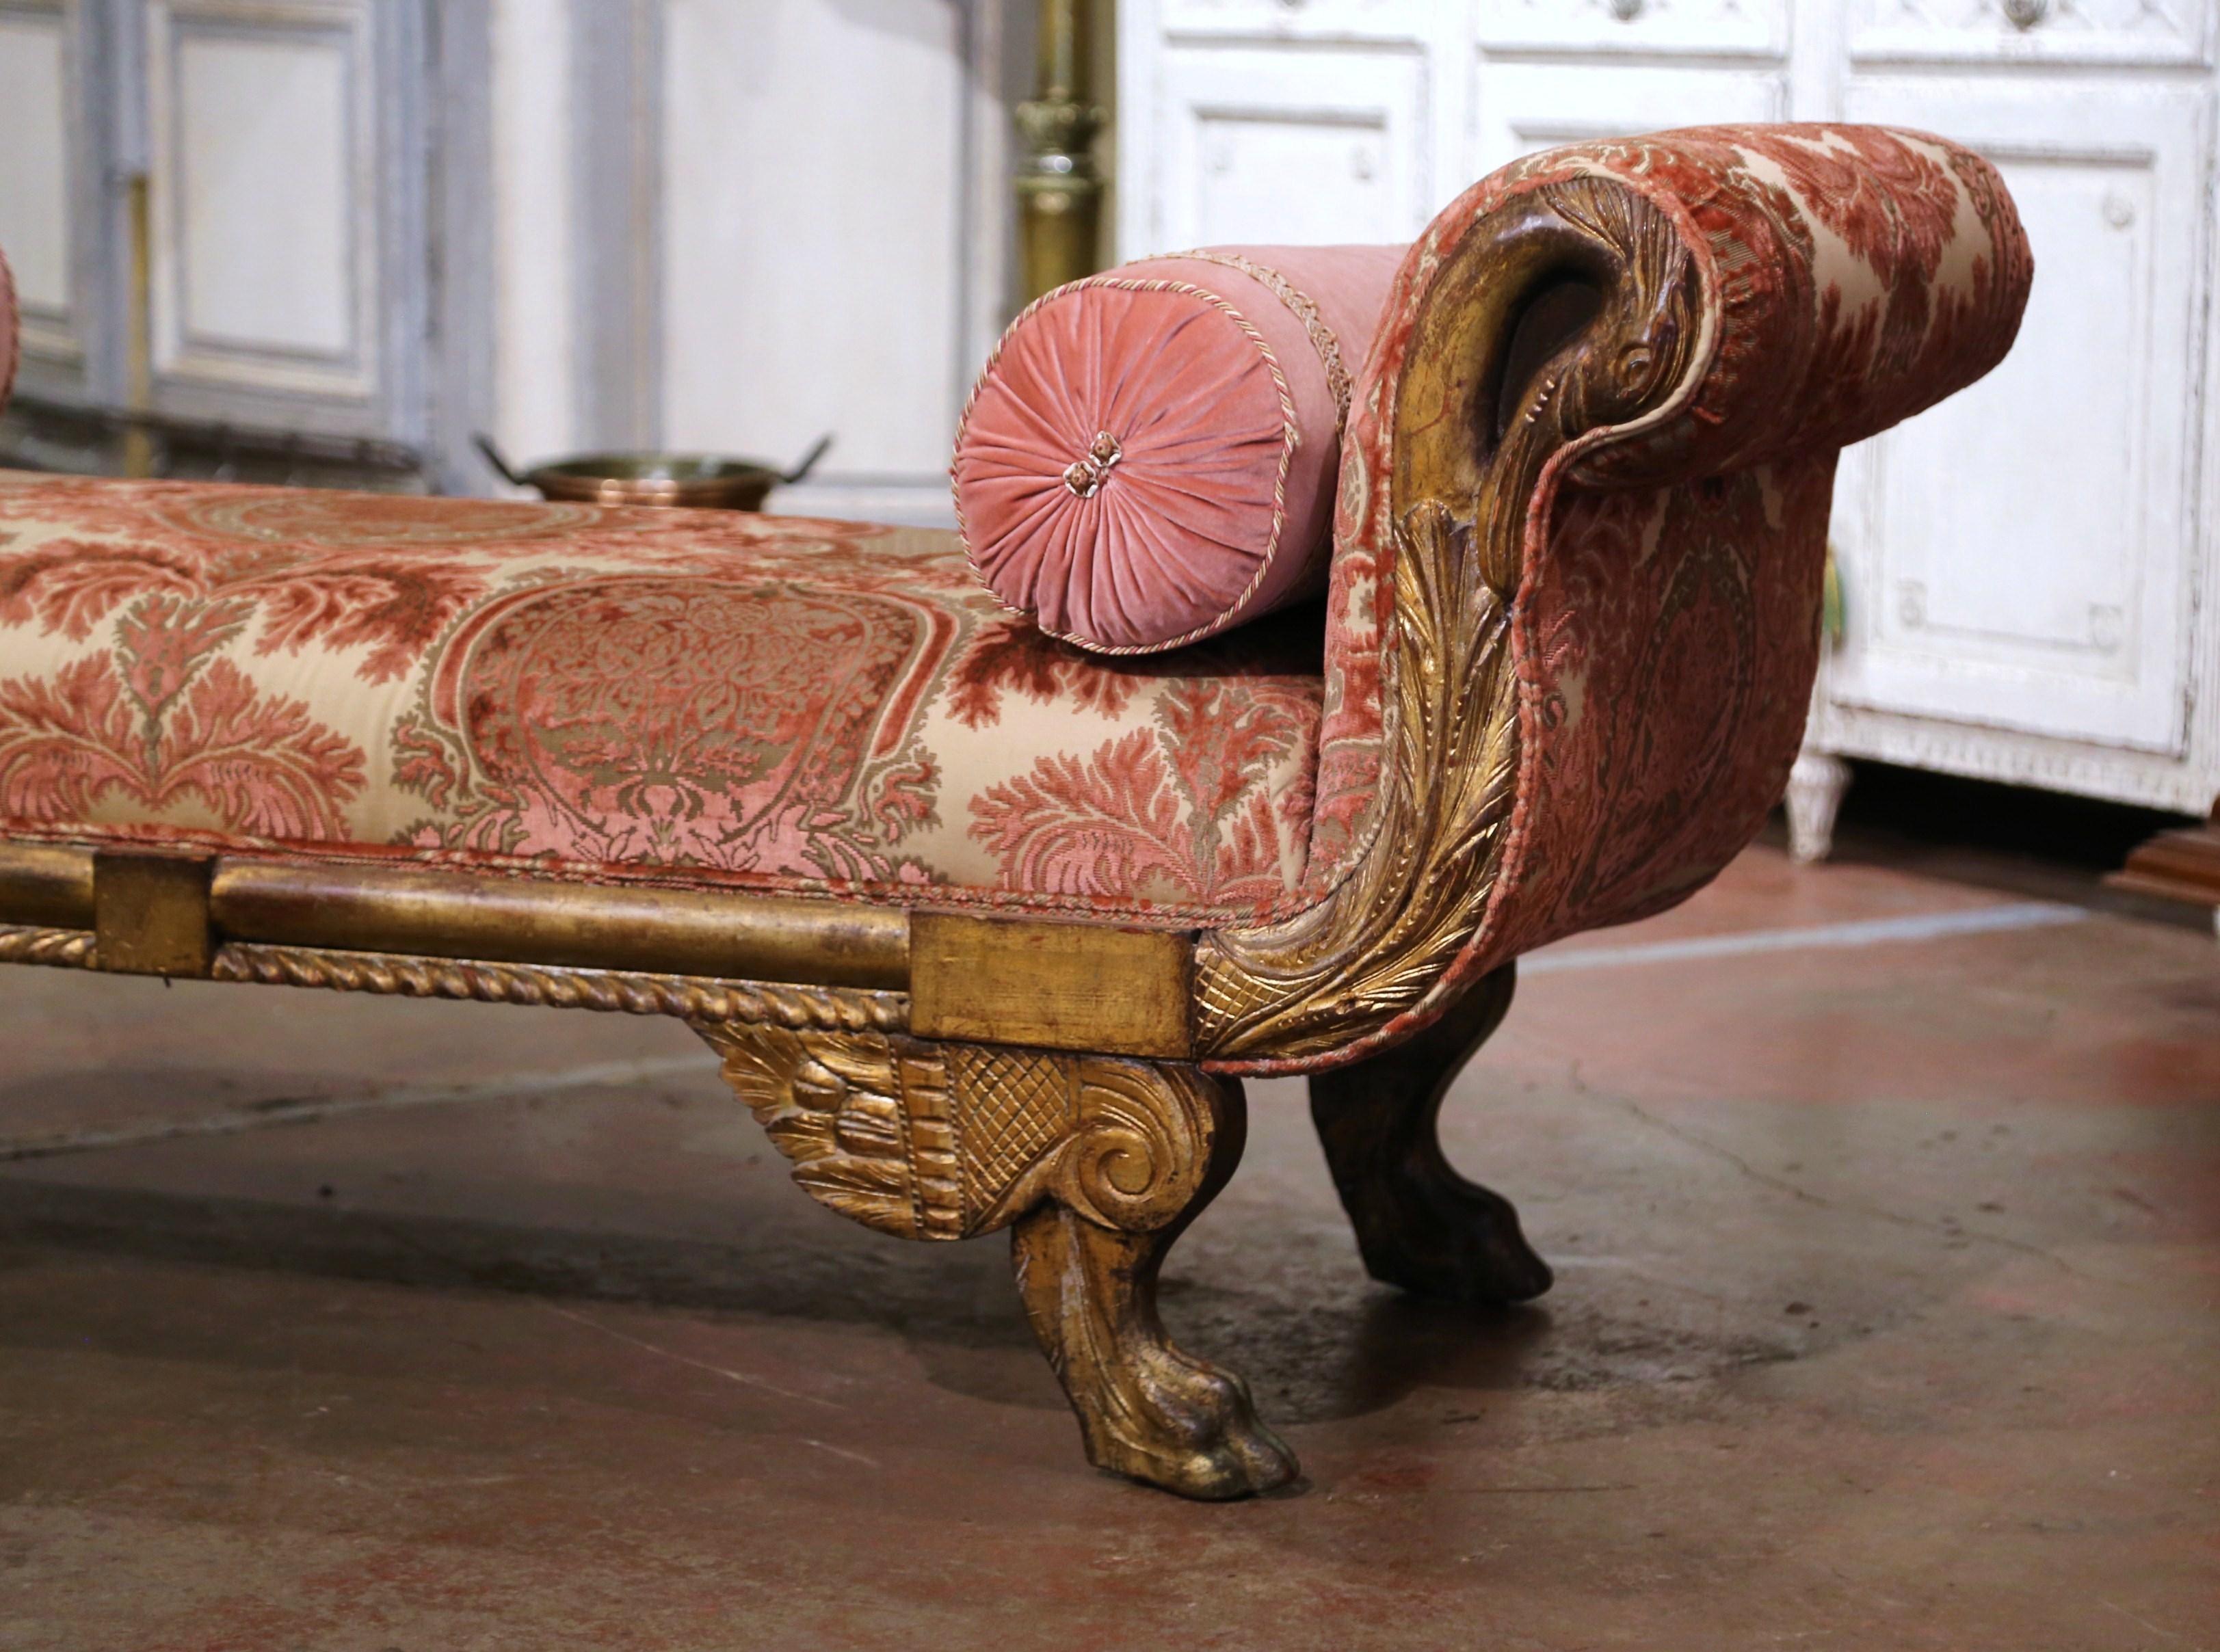 Hand-Carved 19th Century Italian Carved Gilt Wood and Velvet Daybed with Swan Motifs